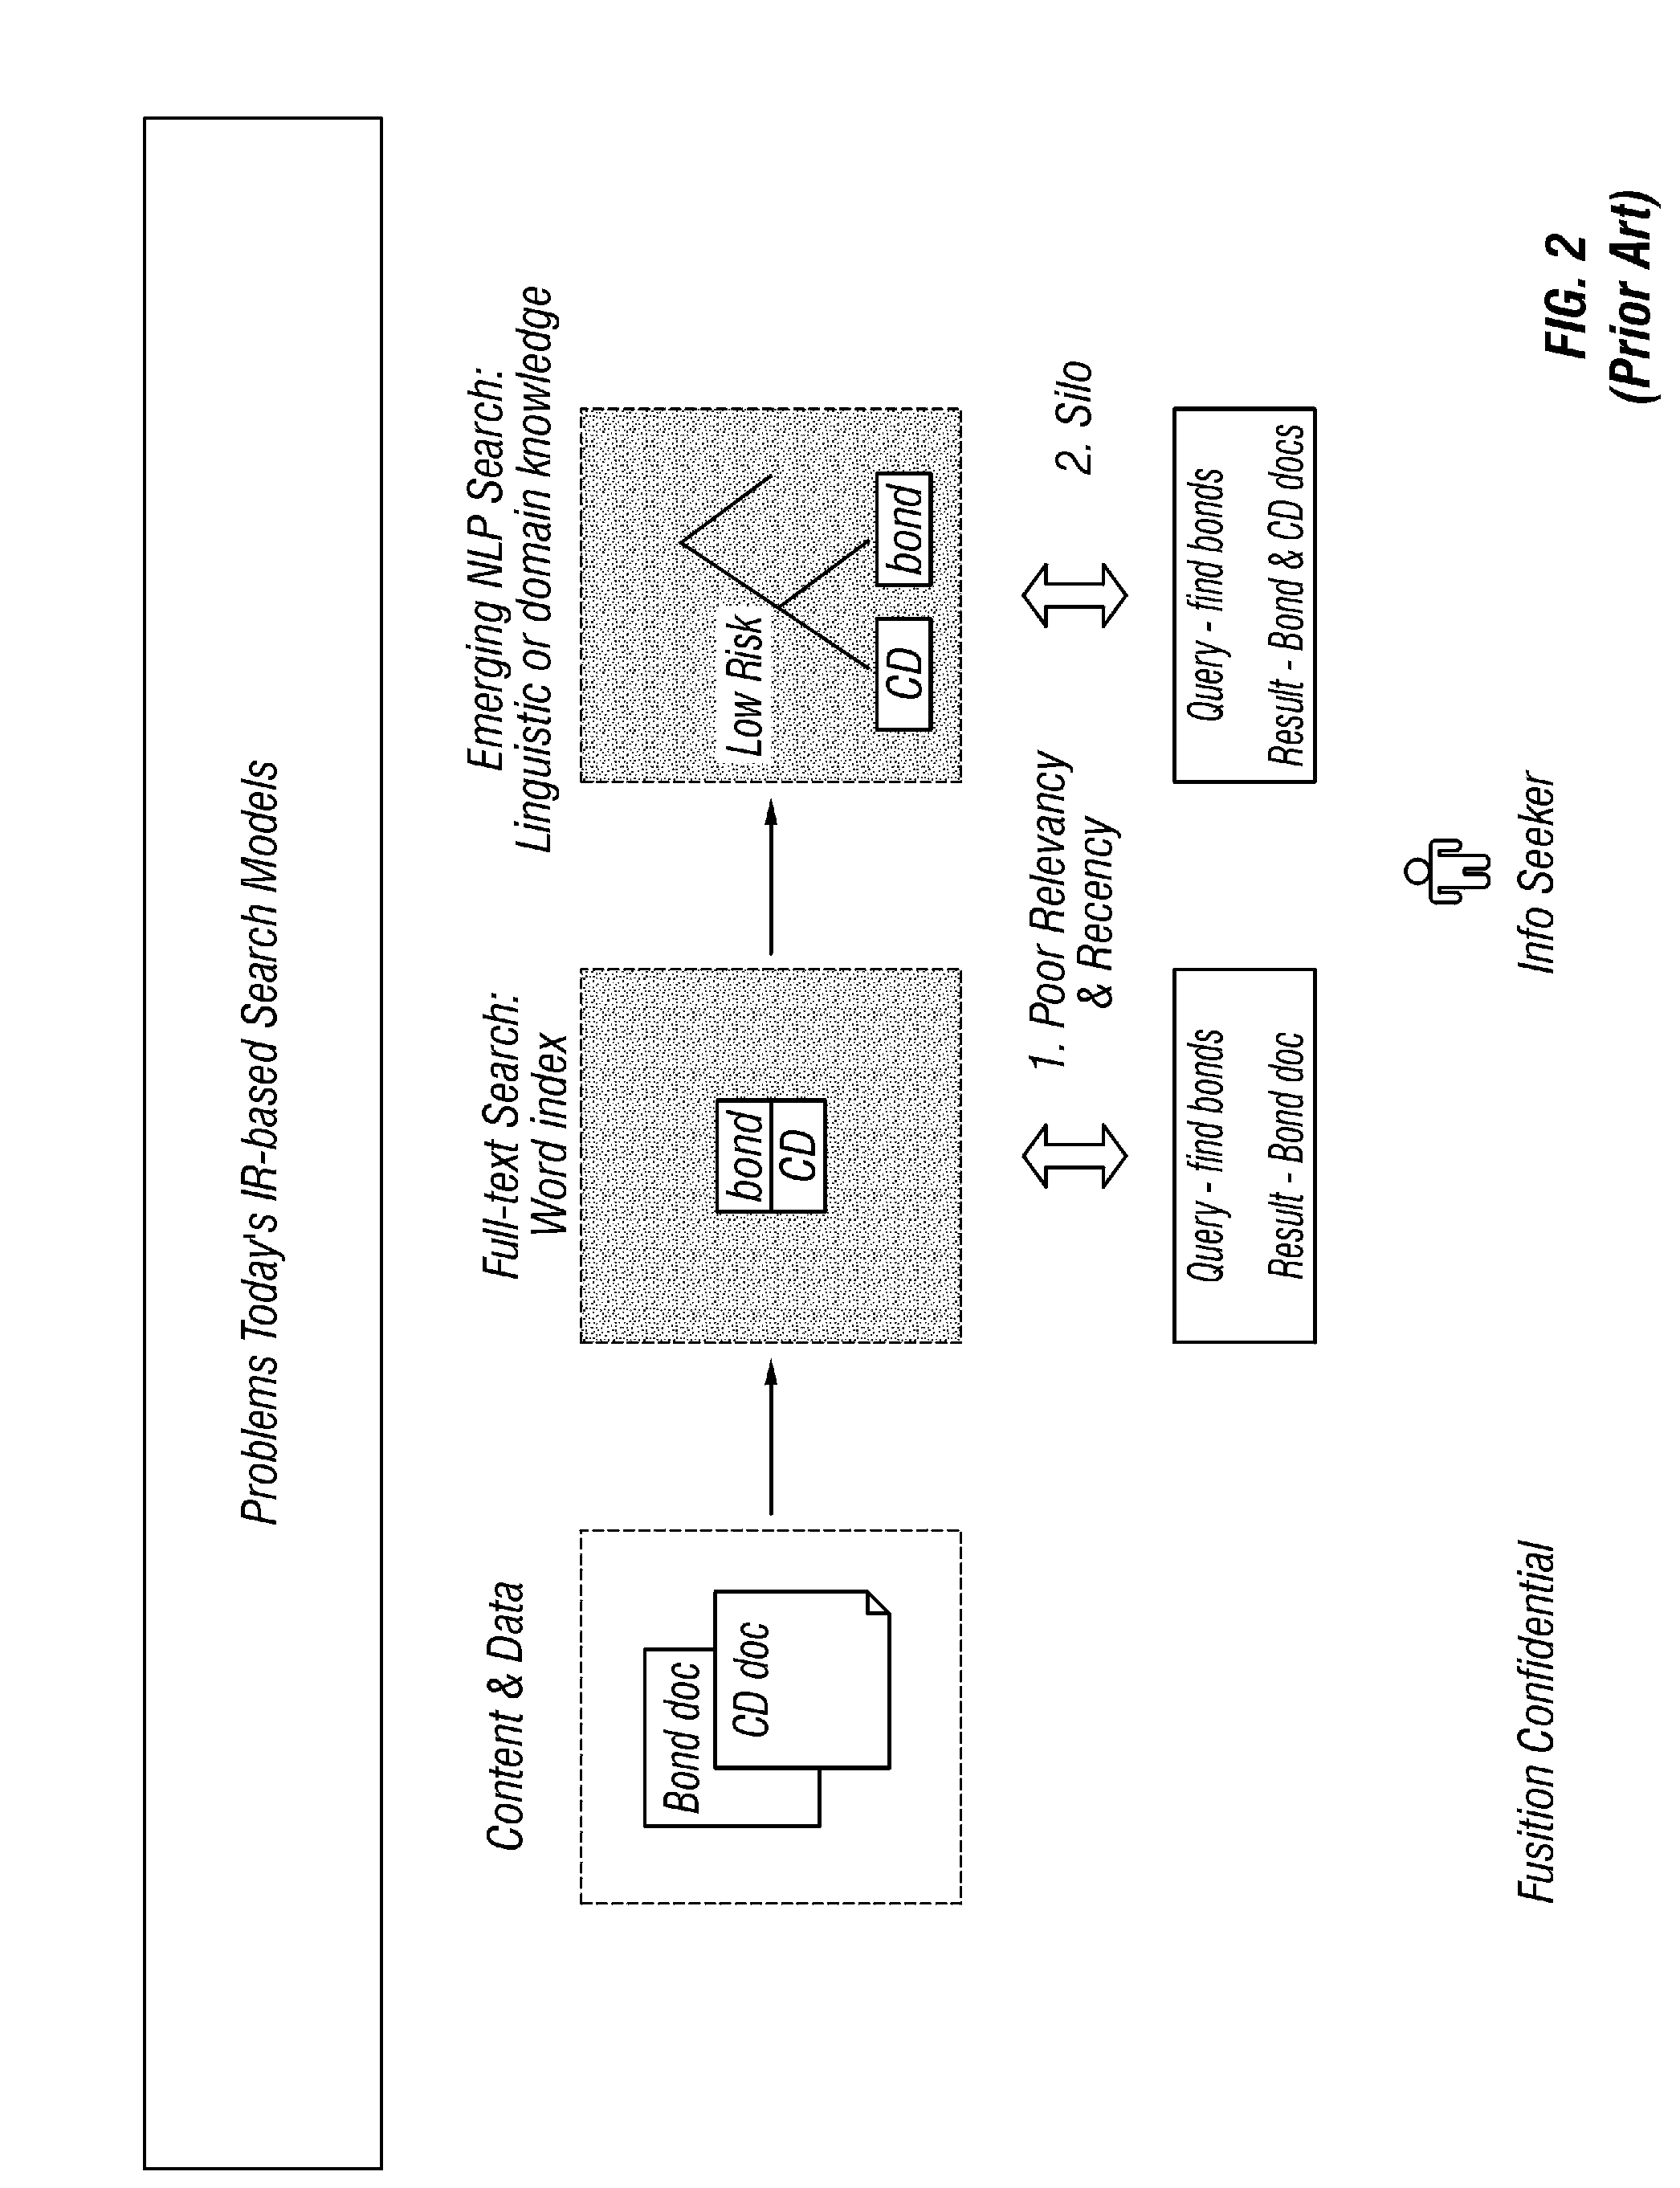 Method and apparatus for predicting destinations in a navigation context based upon observed usage patterns